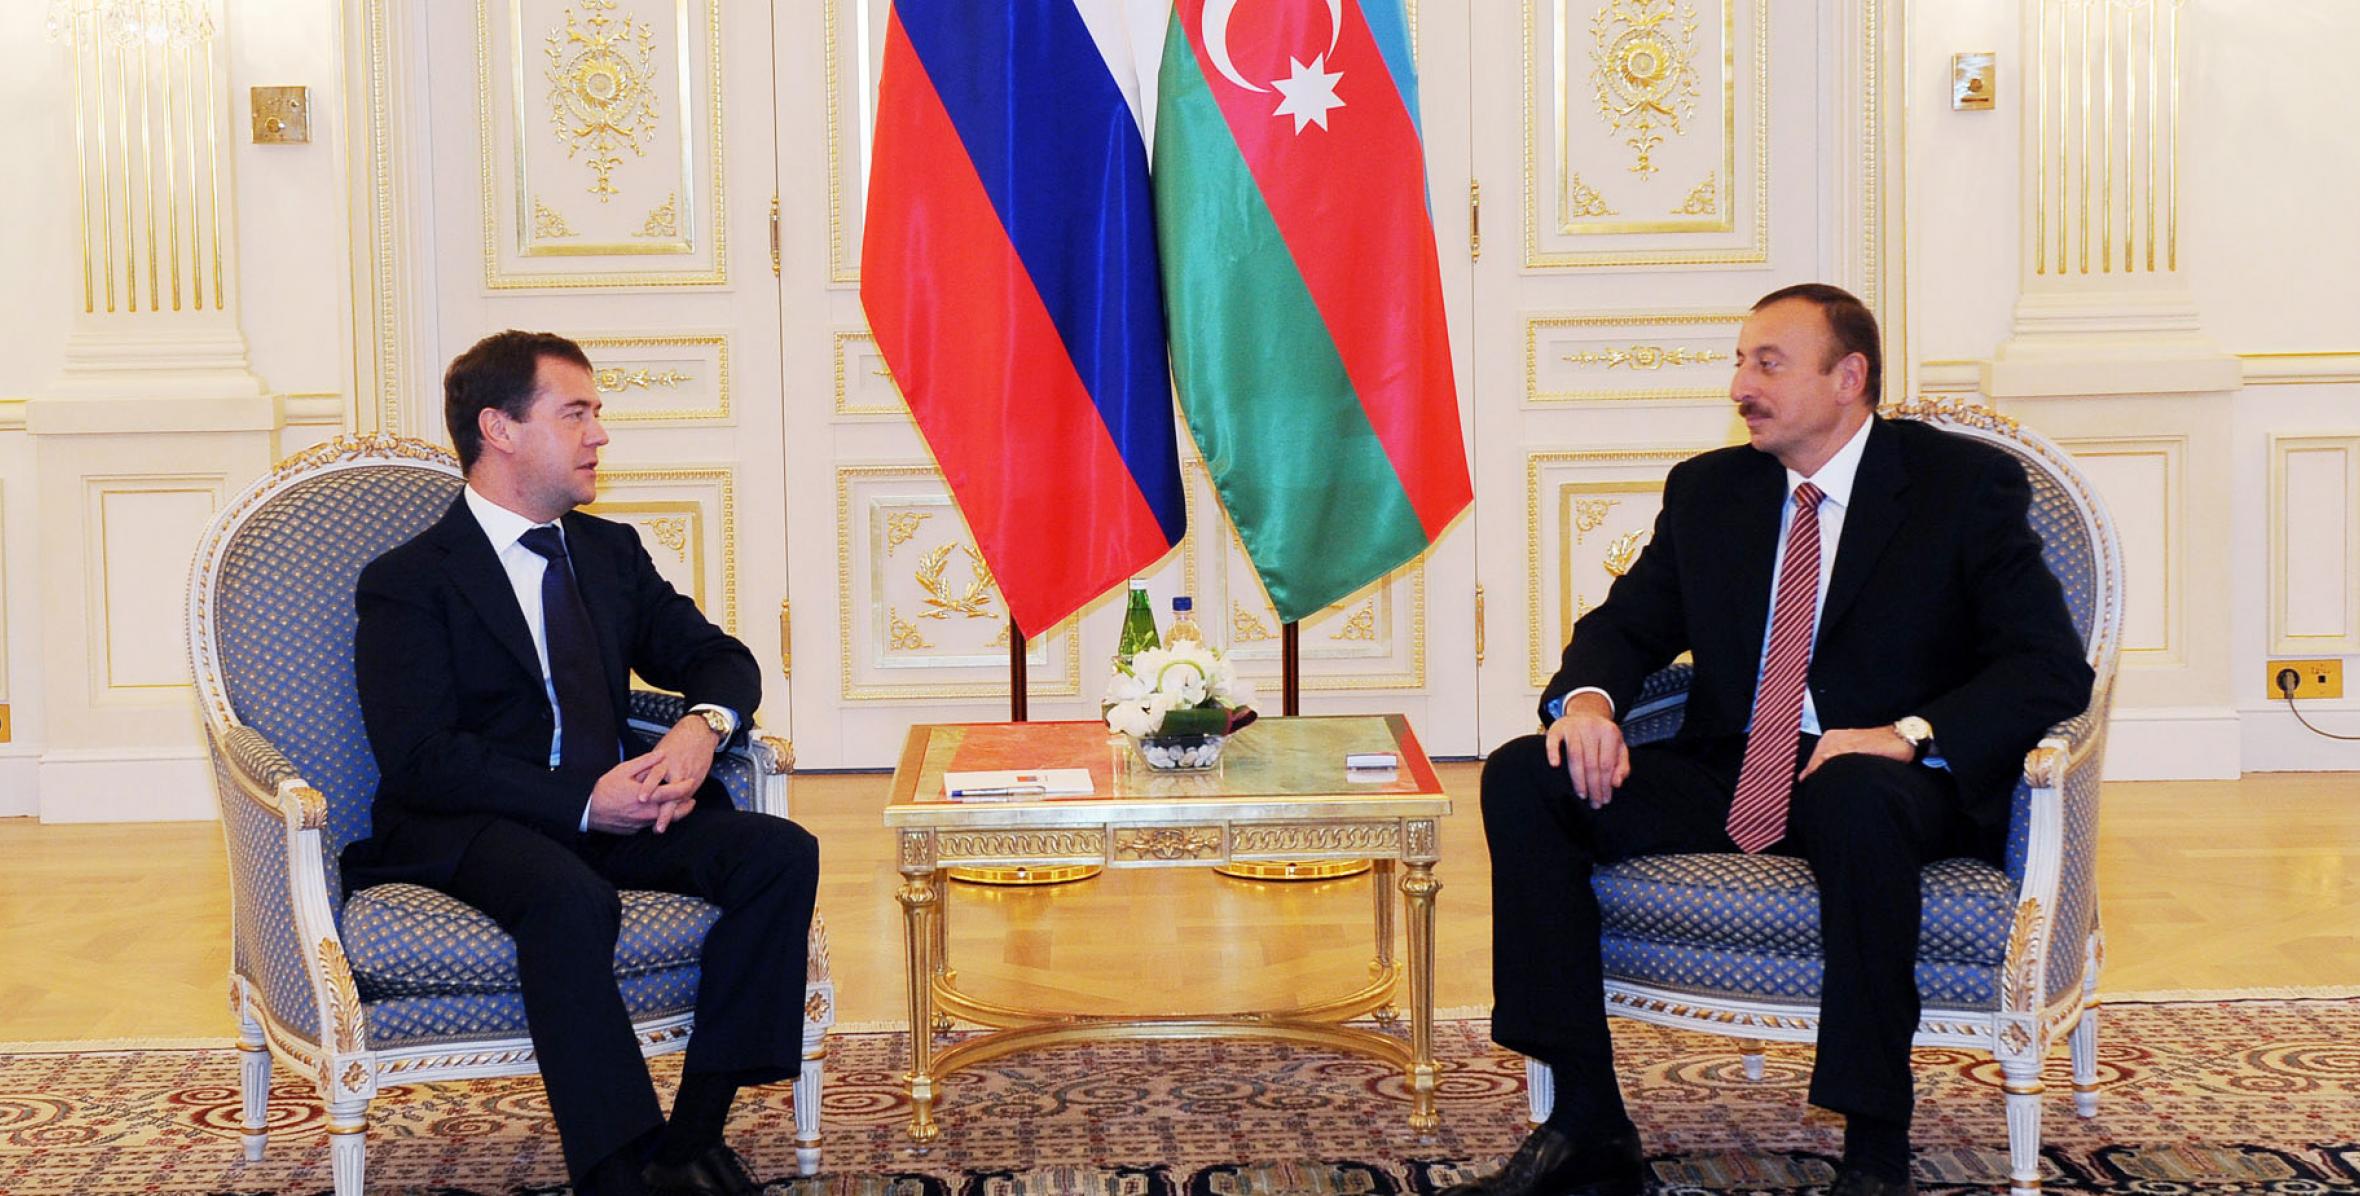 Ilham Aliyev and Russian President Dmitry Medvedev had a meeting